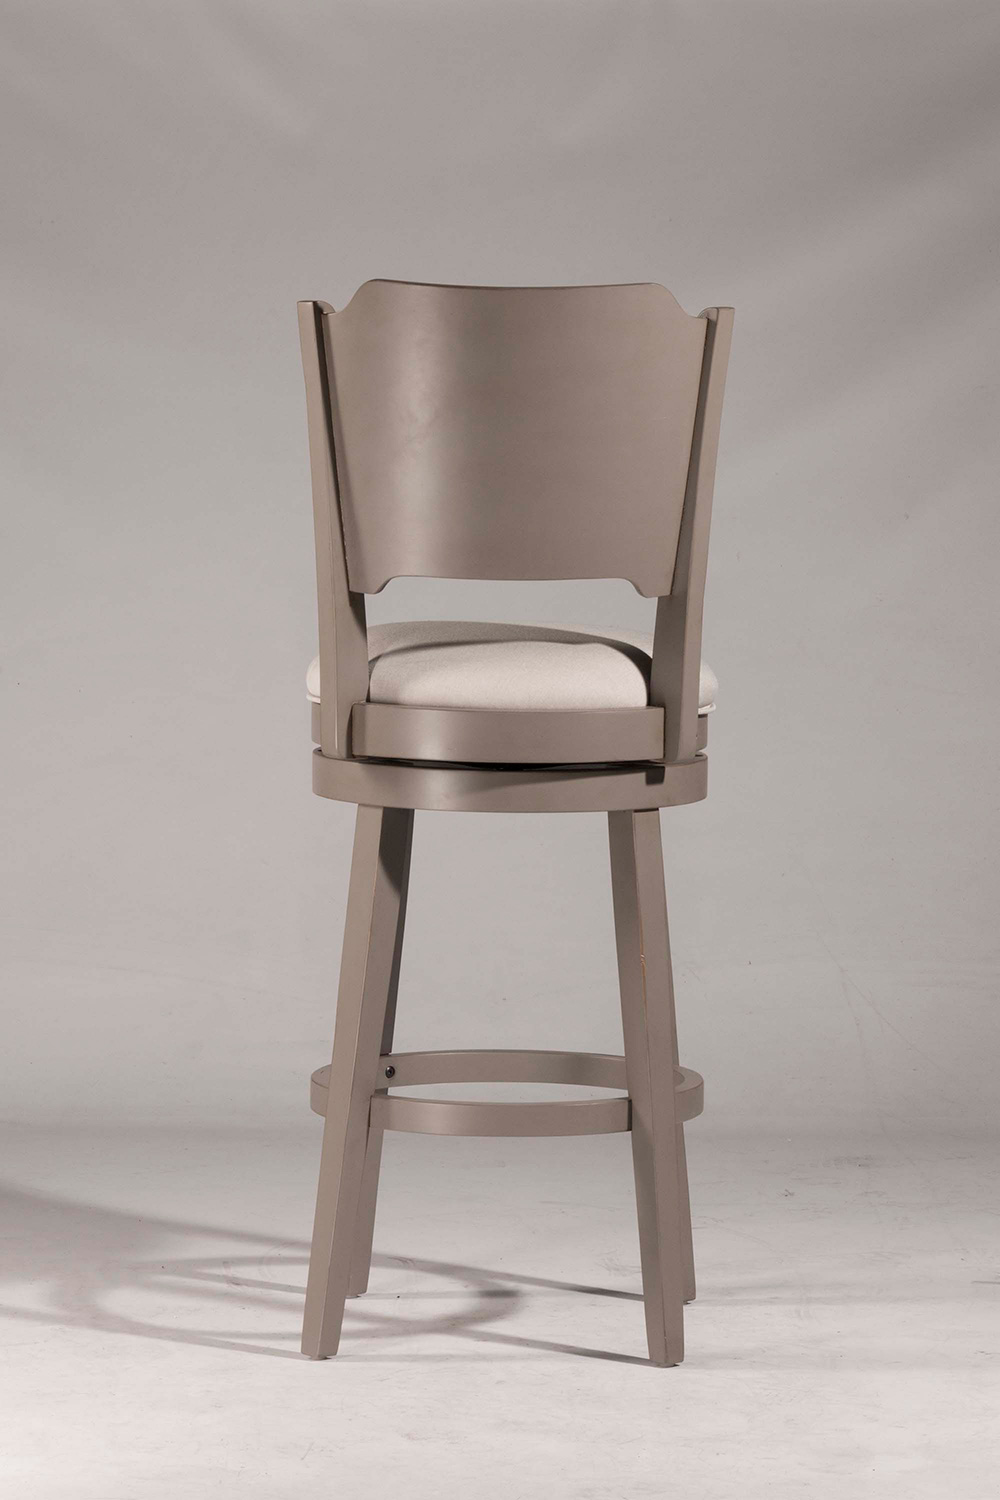 Hillsdale Clarion Swivel Counter Stool - Gray - Fog Fabric